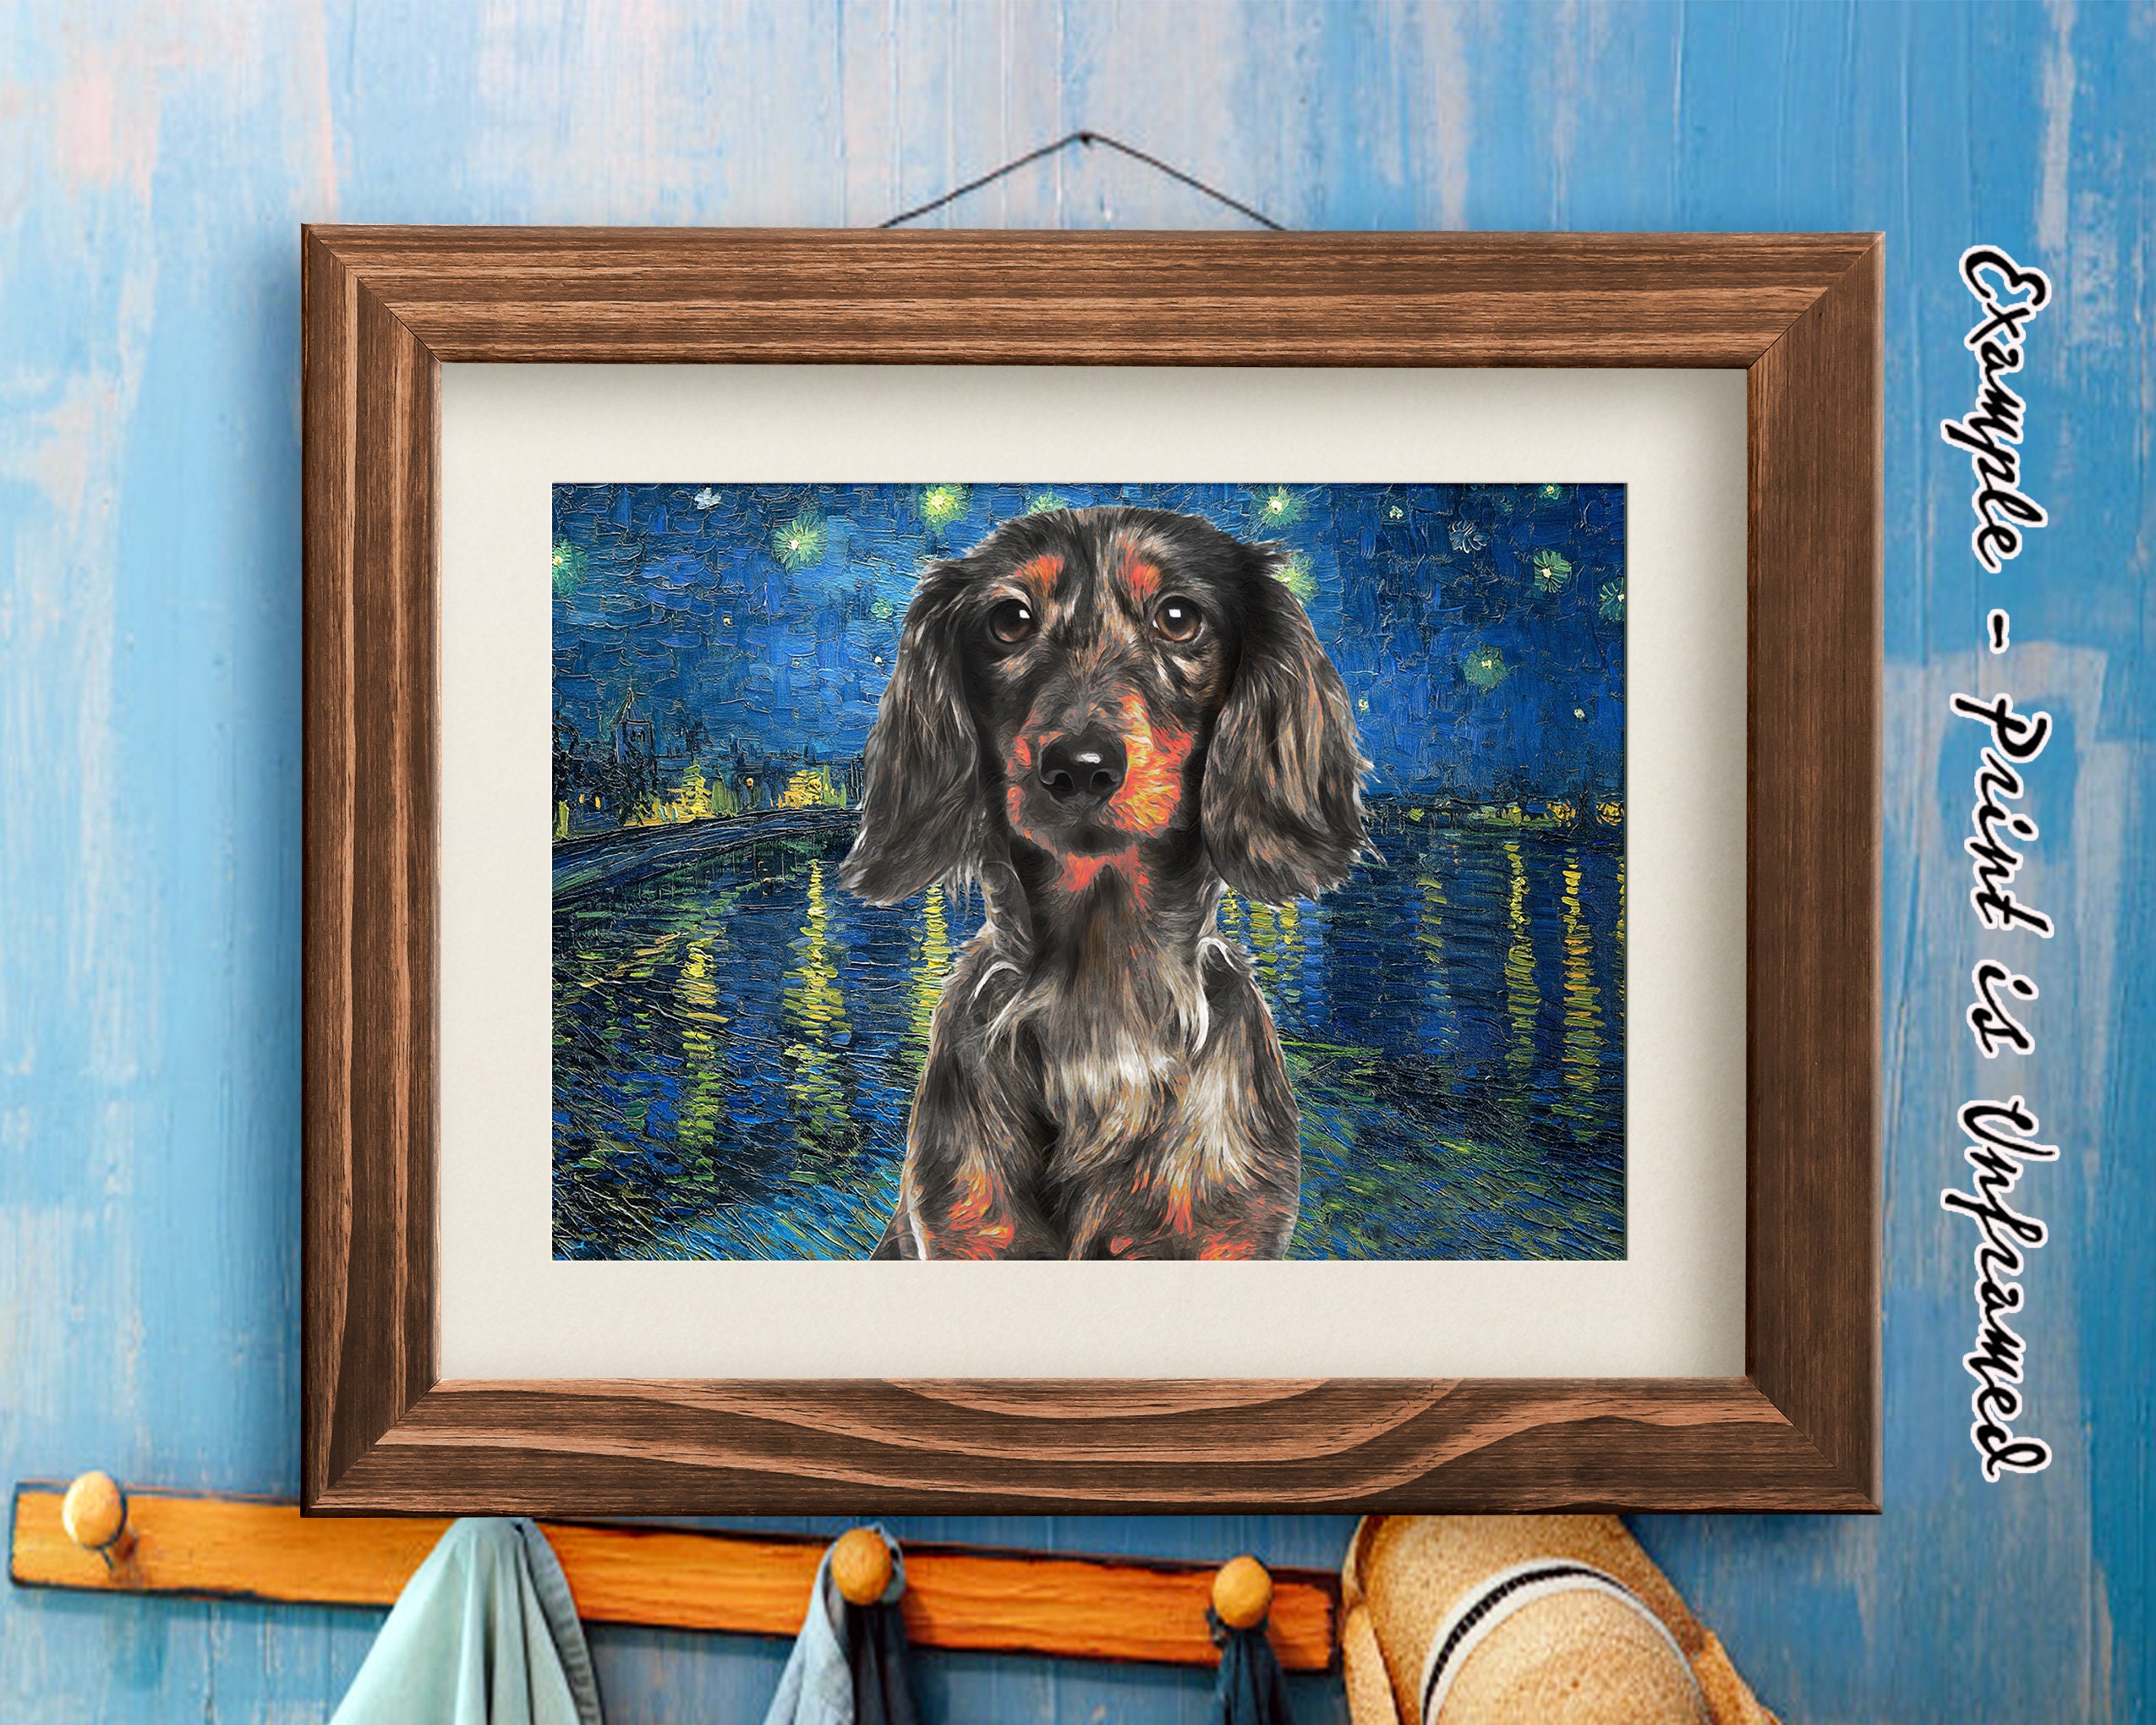 Dapple Long-haired Dachshund Portrait Gogh Wiener Mug Personalized & Doxie Van Dog Night Mom Dad Art - Dog Print CANVAS Etsy Merle and Starry Gifts